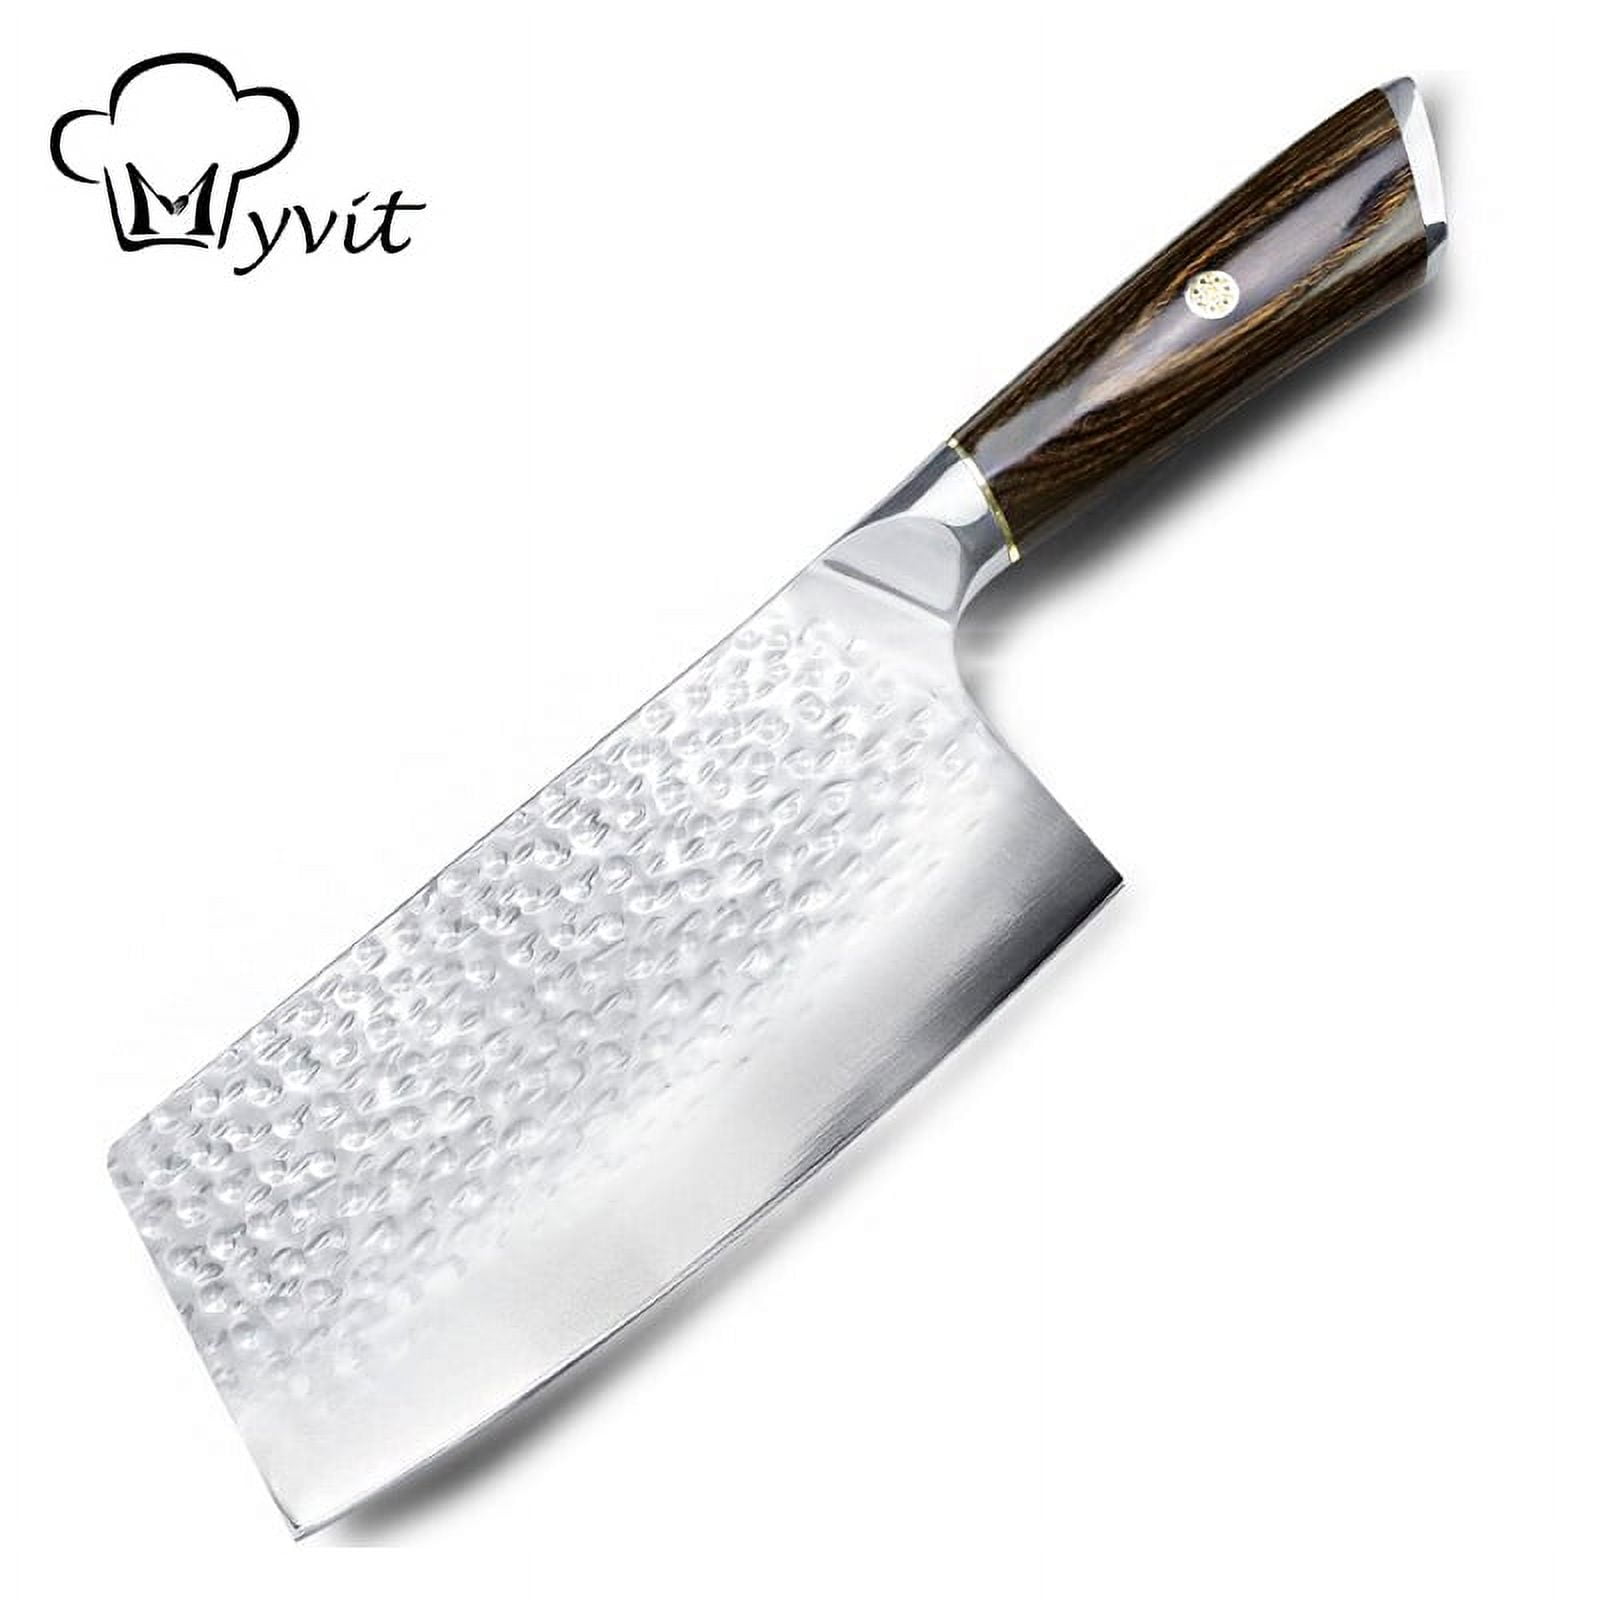 Dropship Meat Cleaver Knife Heavy Duty Japanese Hand Forged Chef Knife,  Cleaver Knife For Meat Cutting to Sell Online at a Lower Price